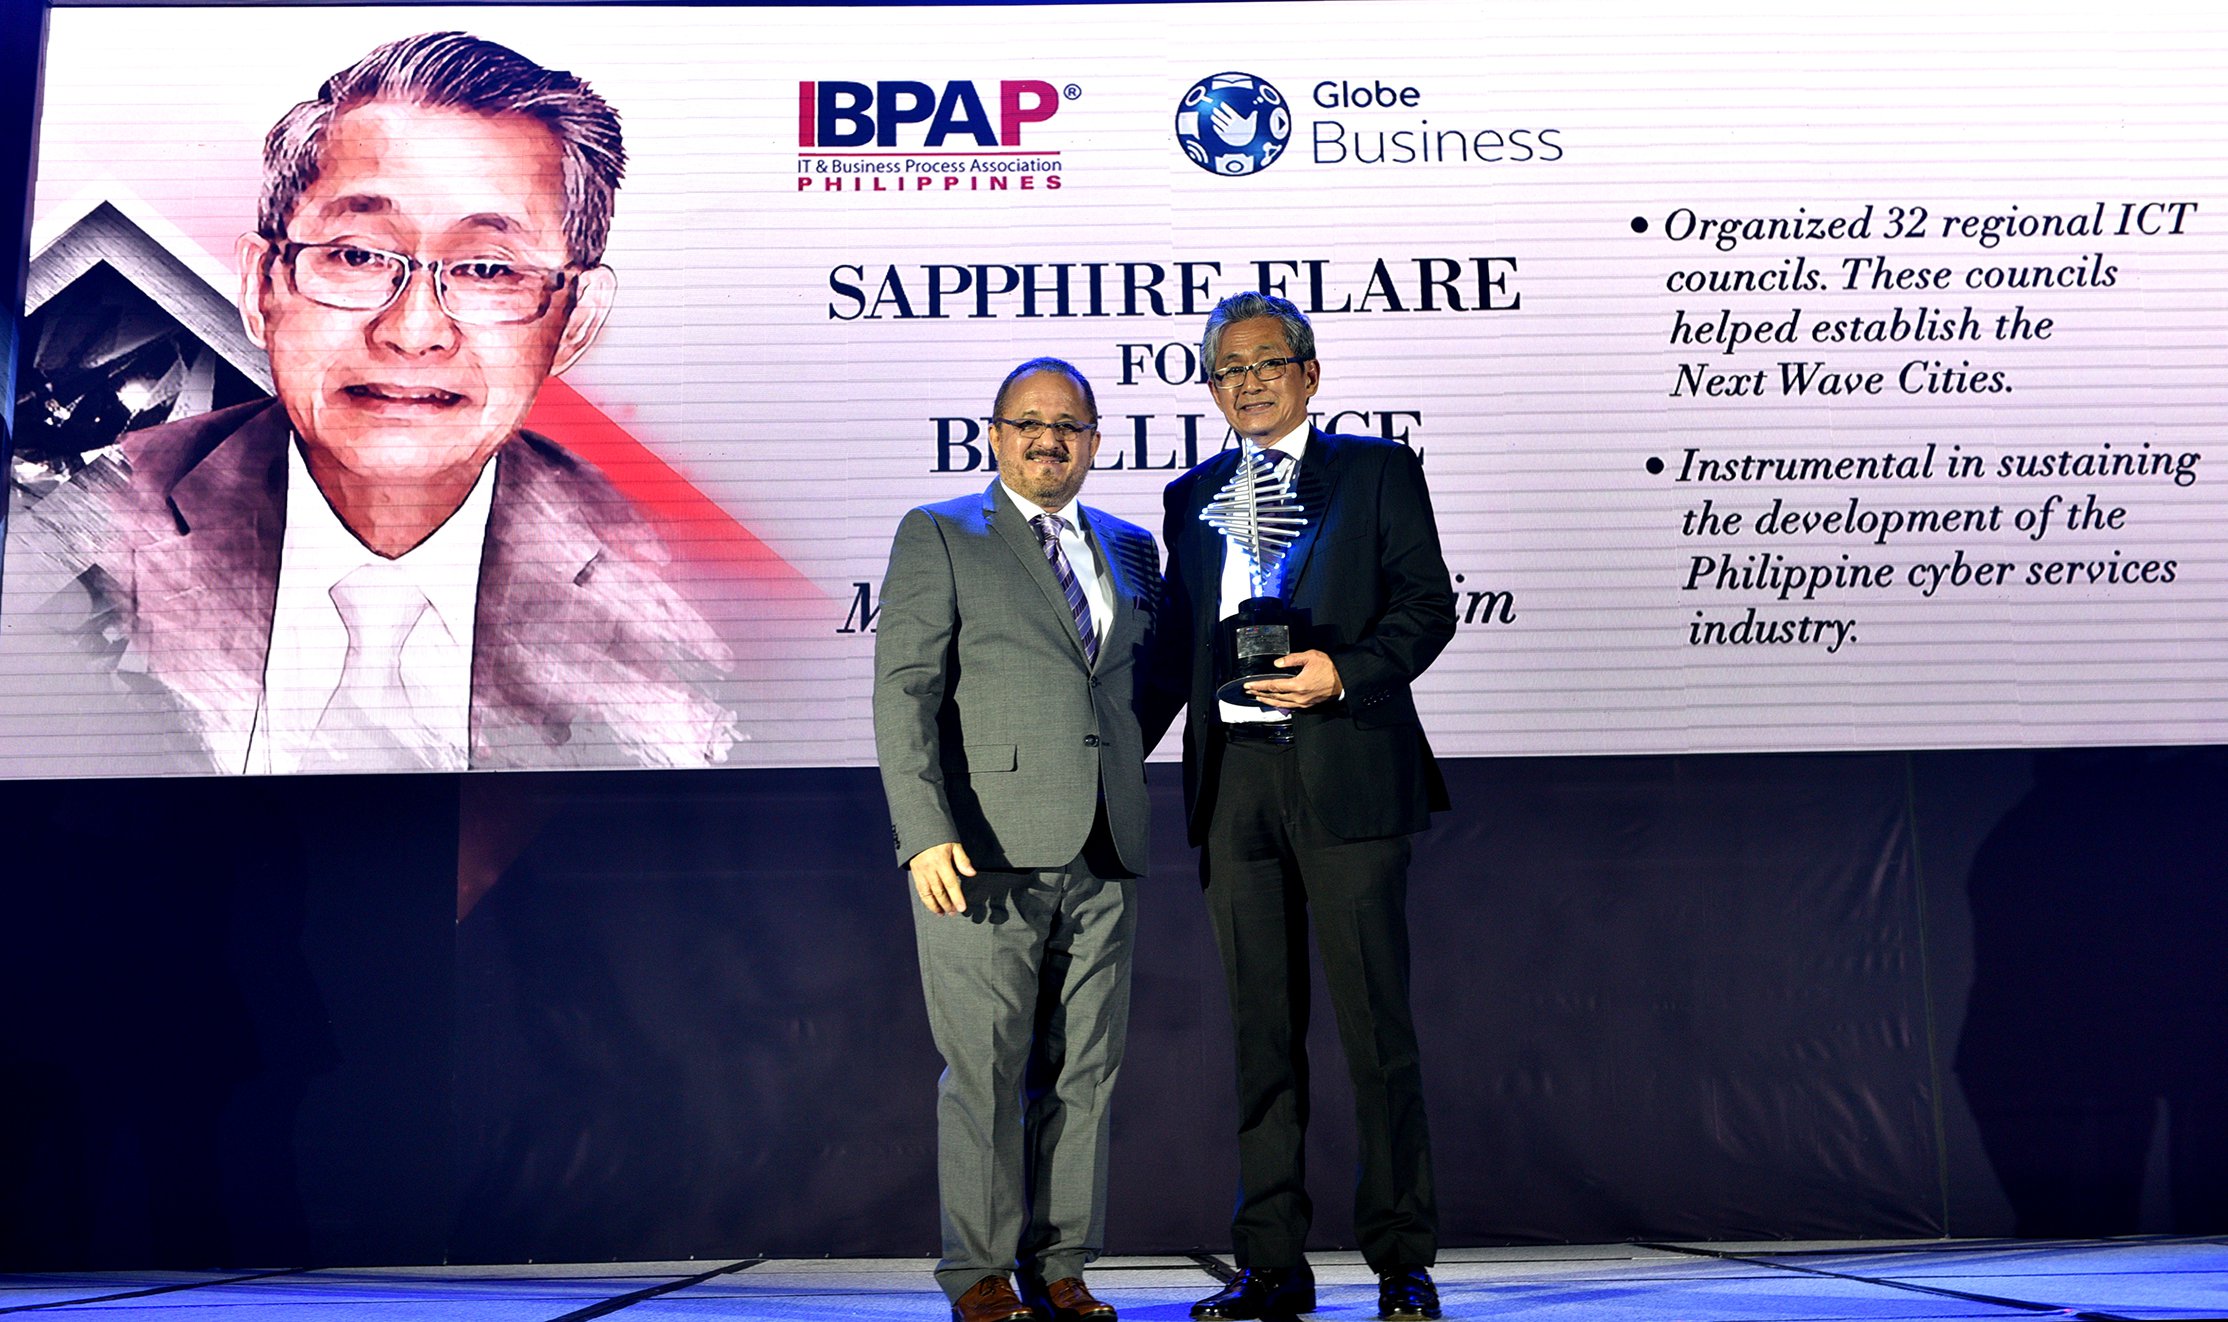 (L-R) Globe Chief Commercial Officer Albert de Larrazabal presents the “Globe Business-IBPAP Sapphire Flare for Brilliance” to Monchito Ibrahim for his contributions to the IT-BPM Sector.